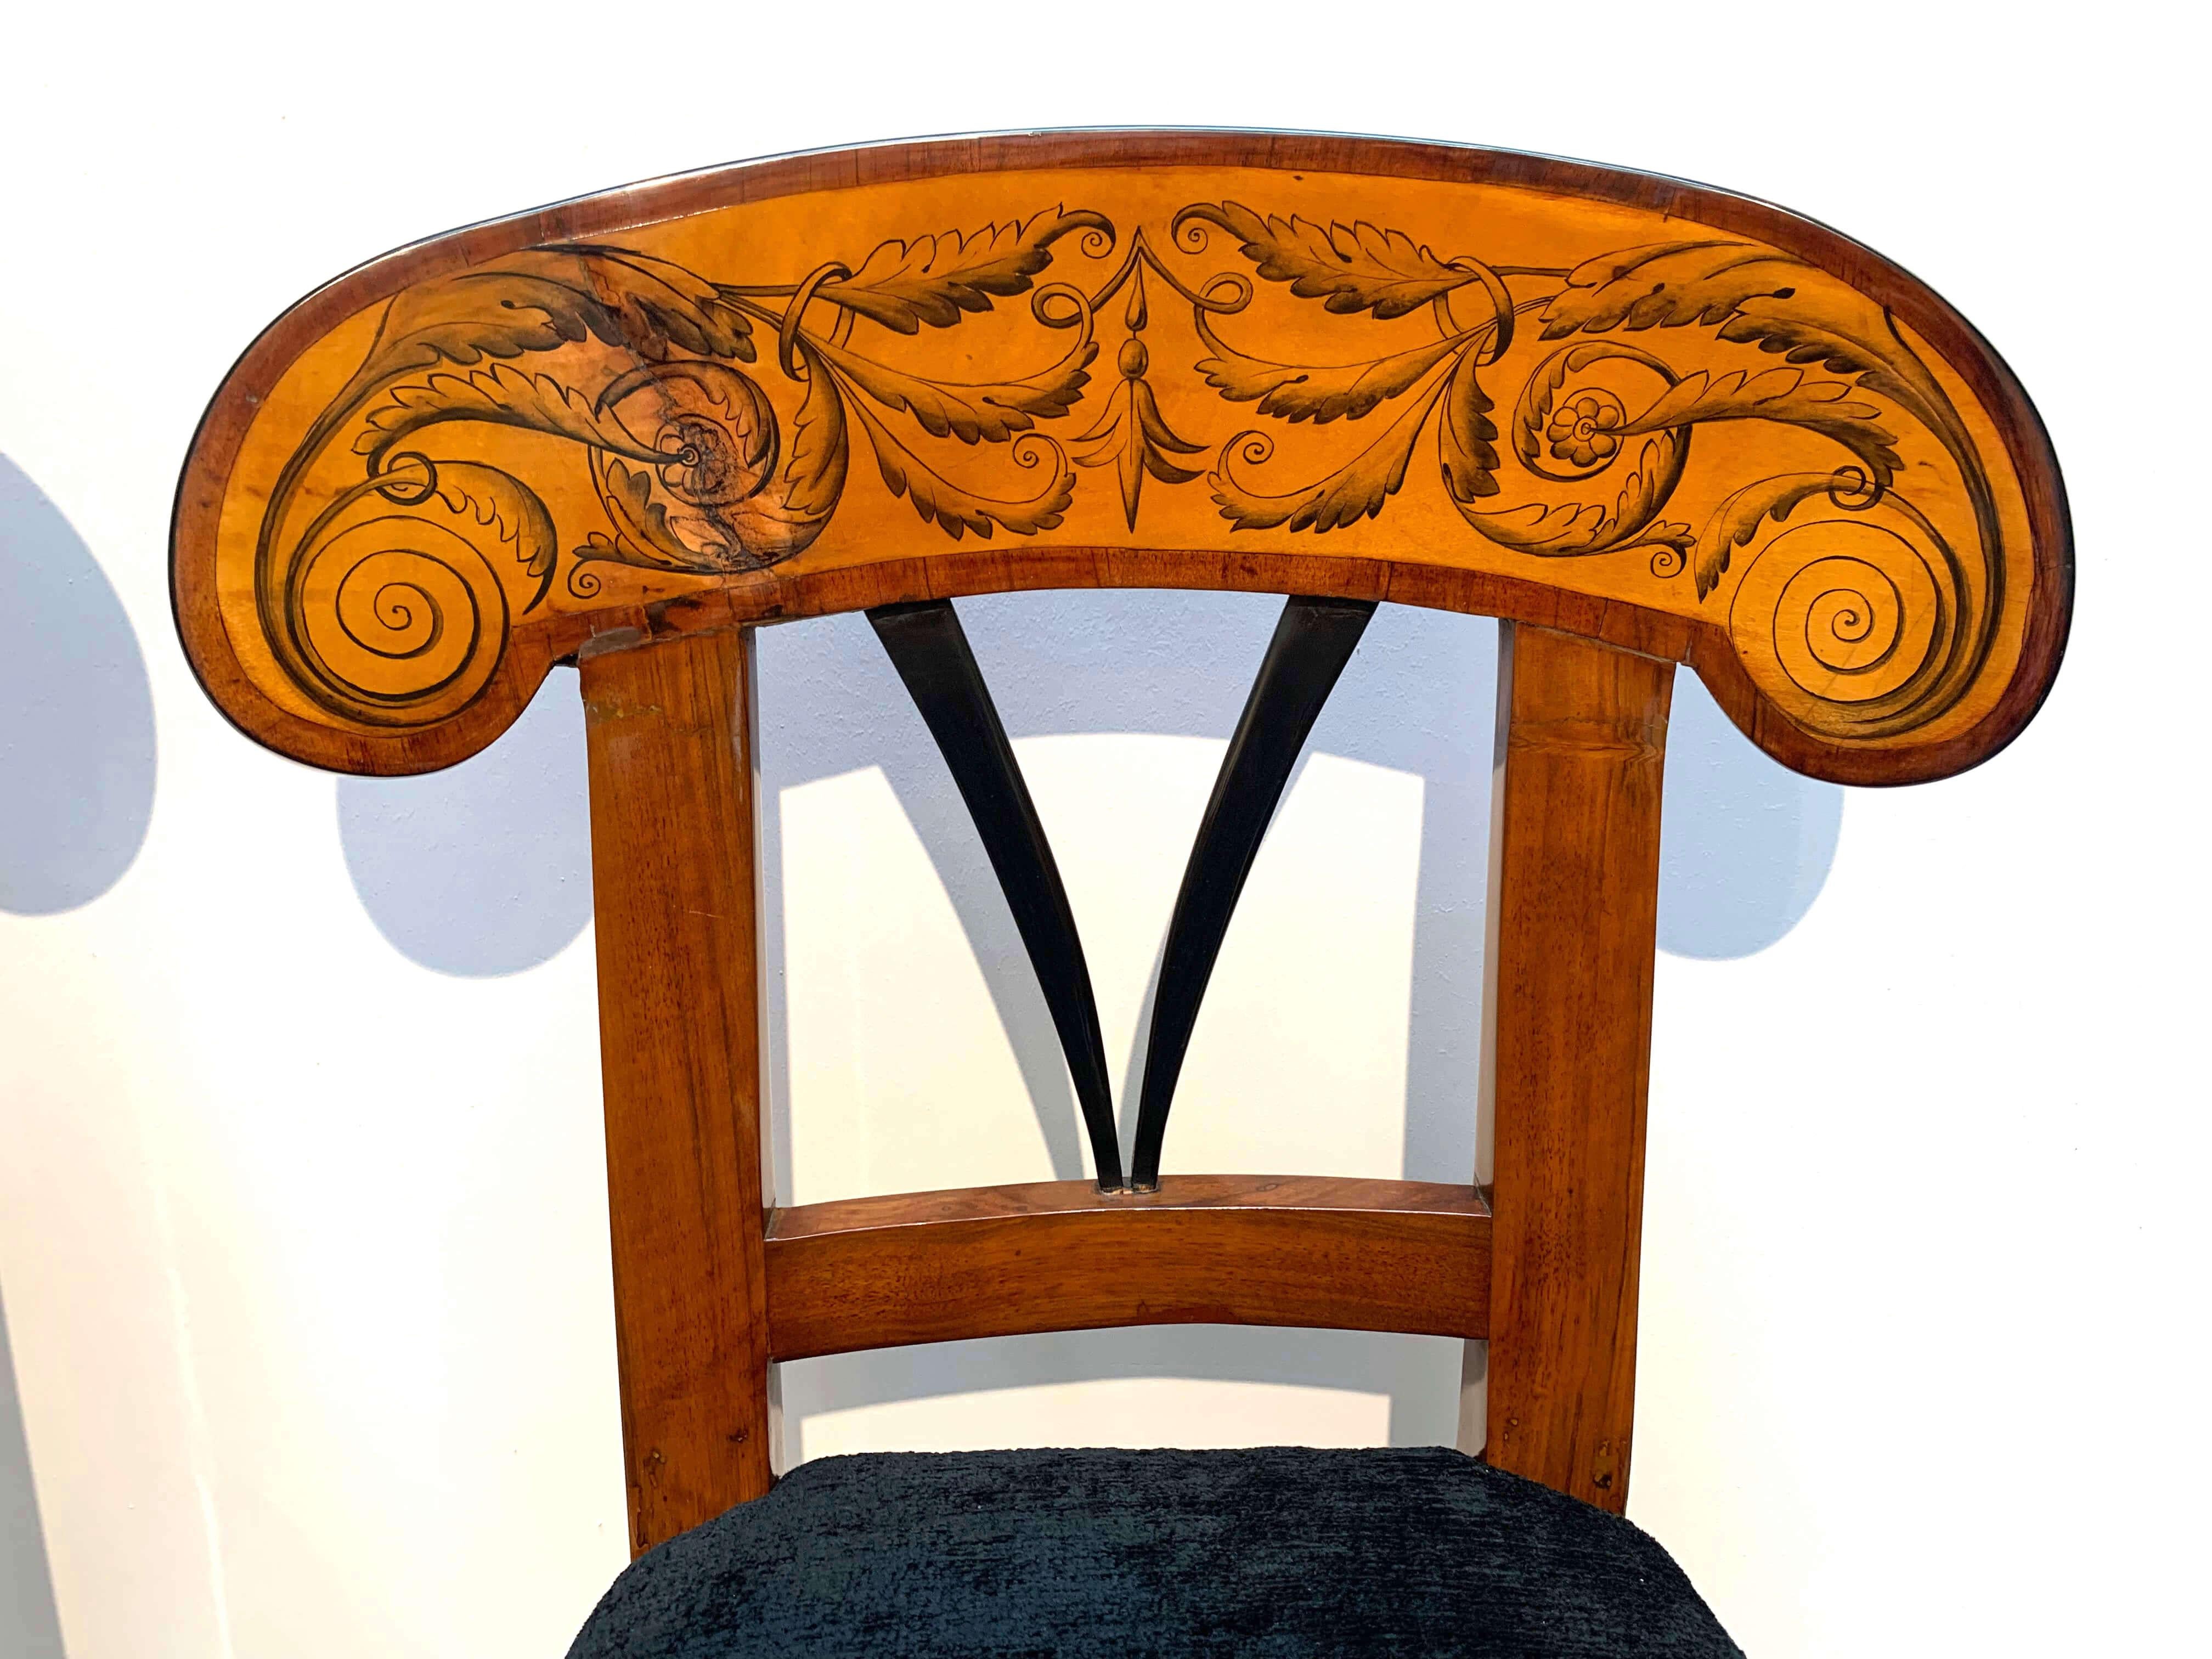 Pair of Biedermeier Shovel Chairs with Ink Painting, Walnut, South German, 1830s For Sale 5